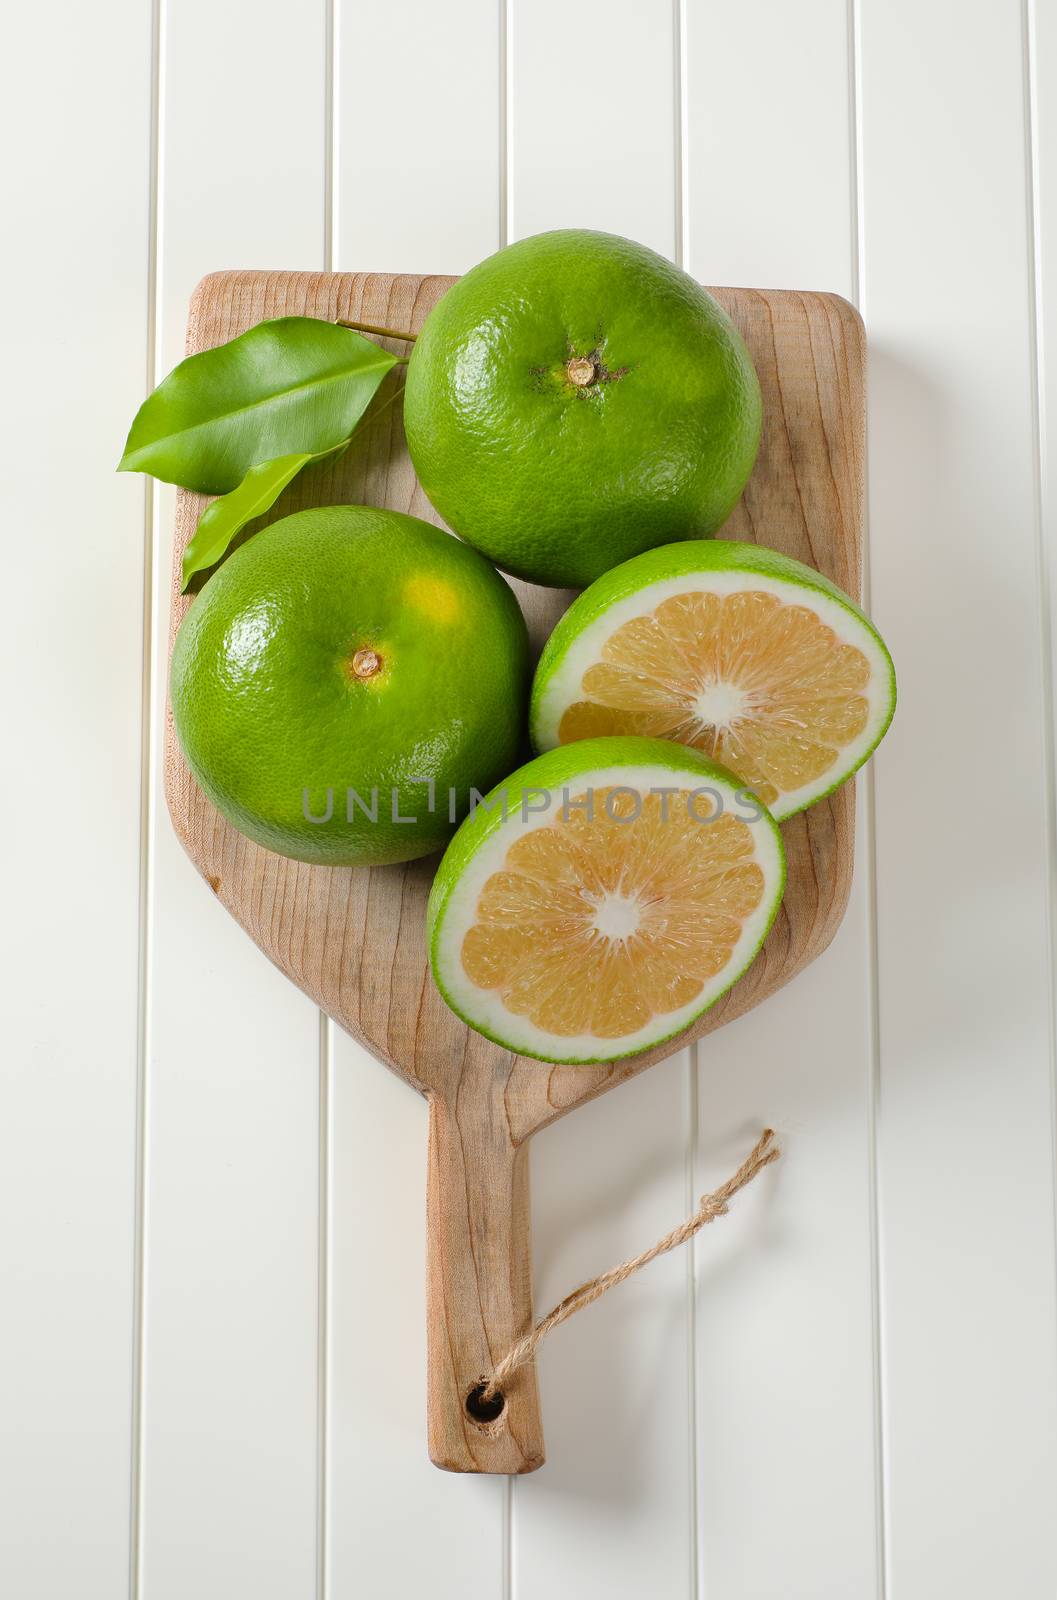 Sweetie fruits (green grapefruits, pomelits) on cutting board